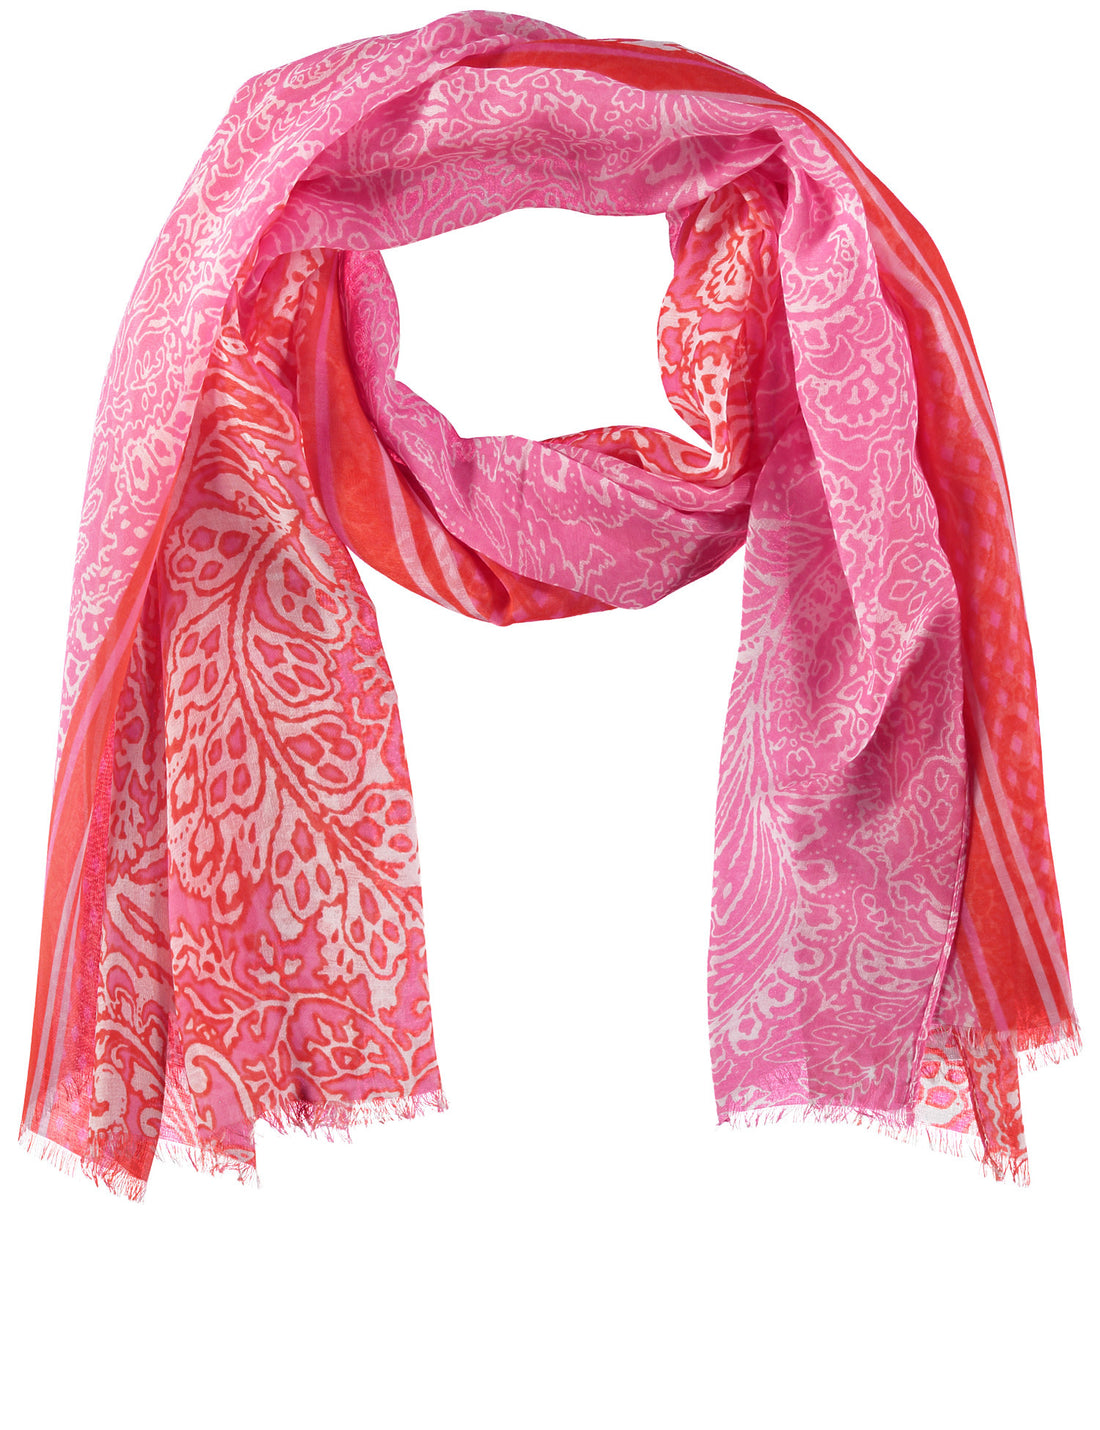 Patterned Scarf With A Fringed Edge